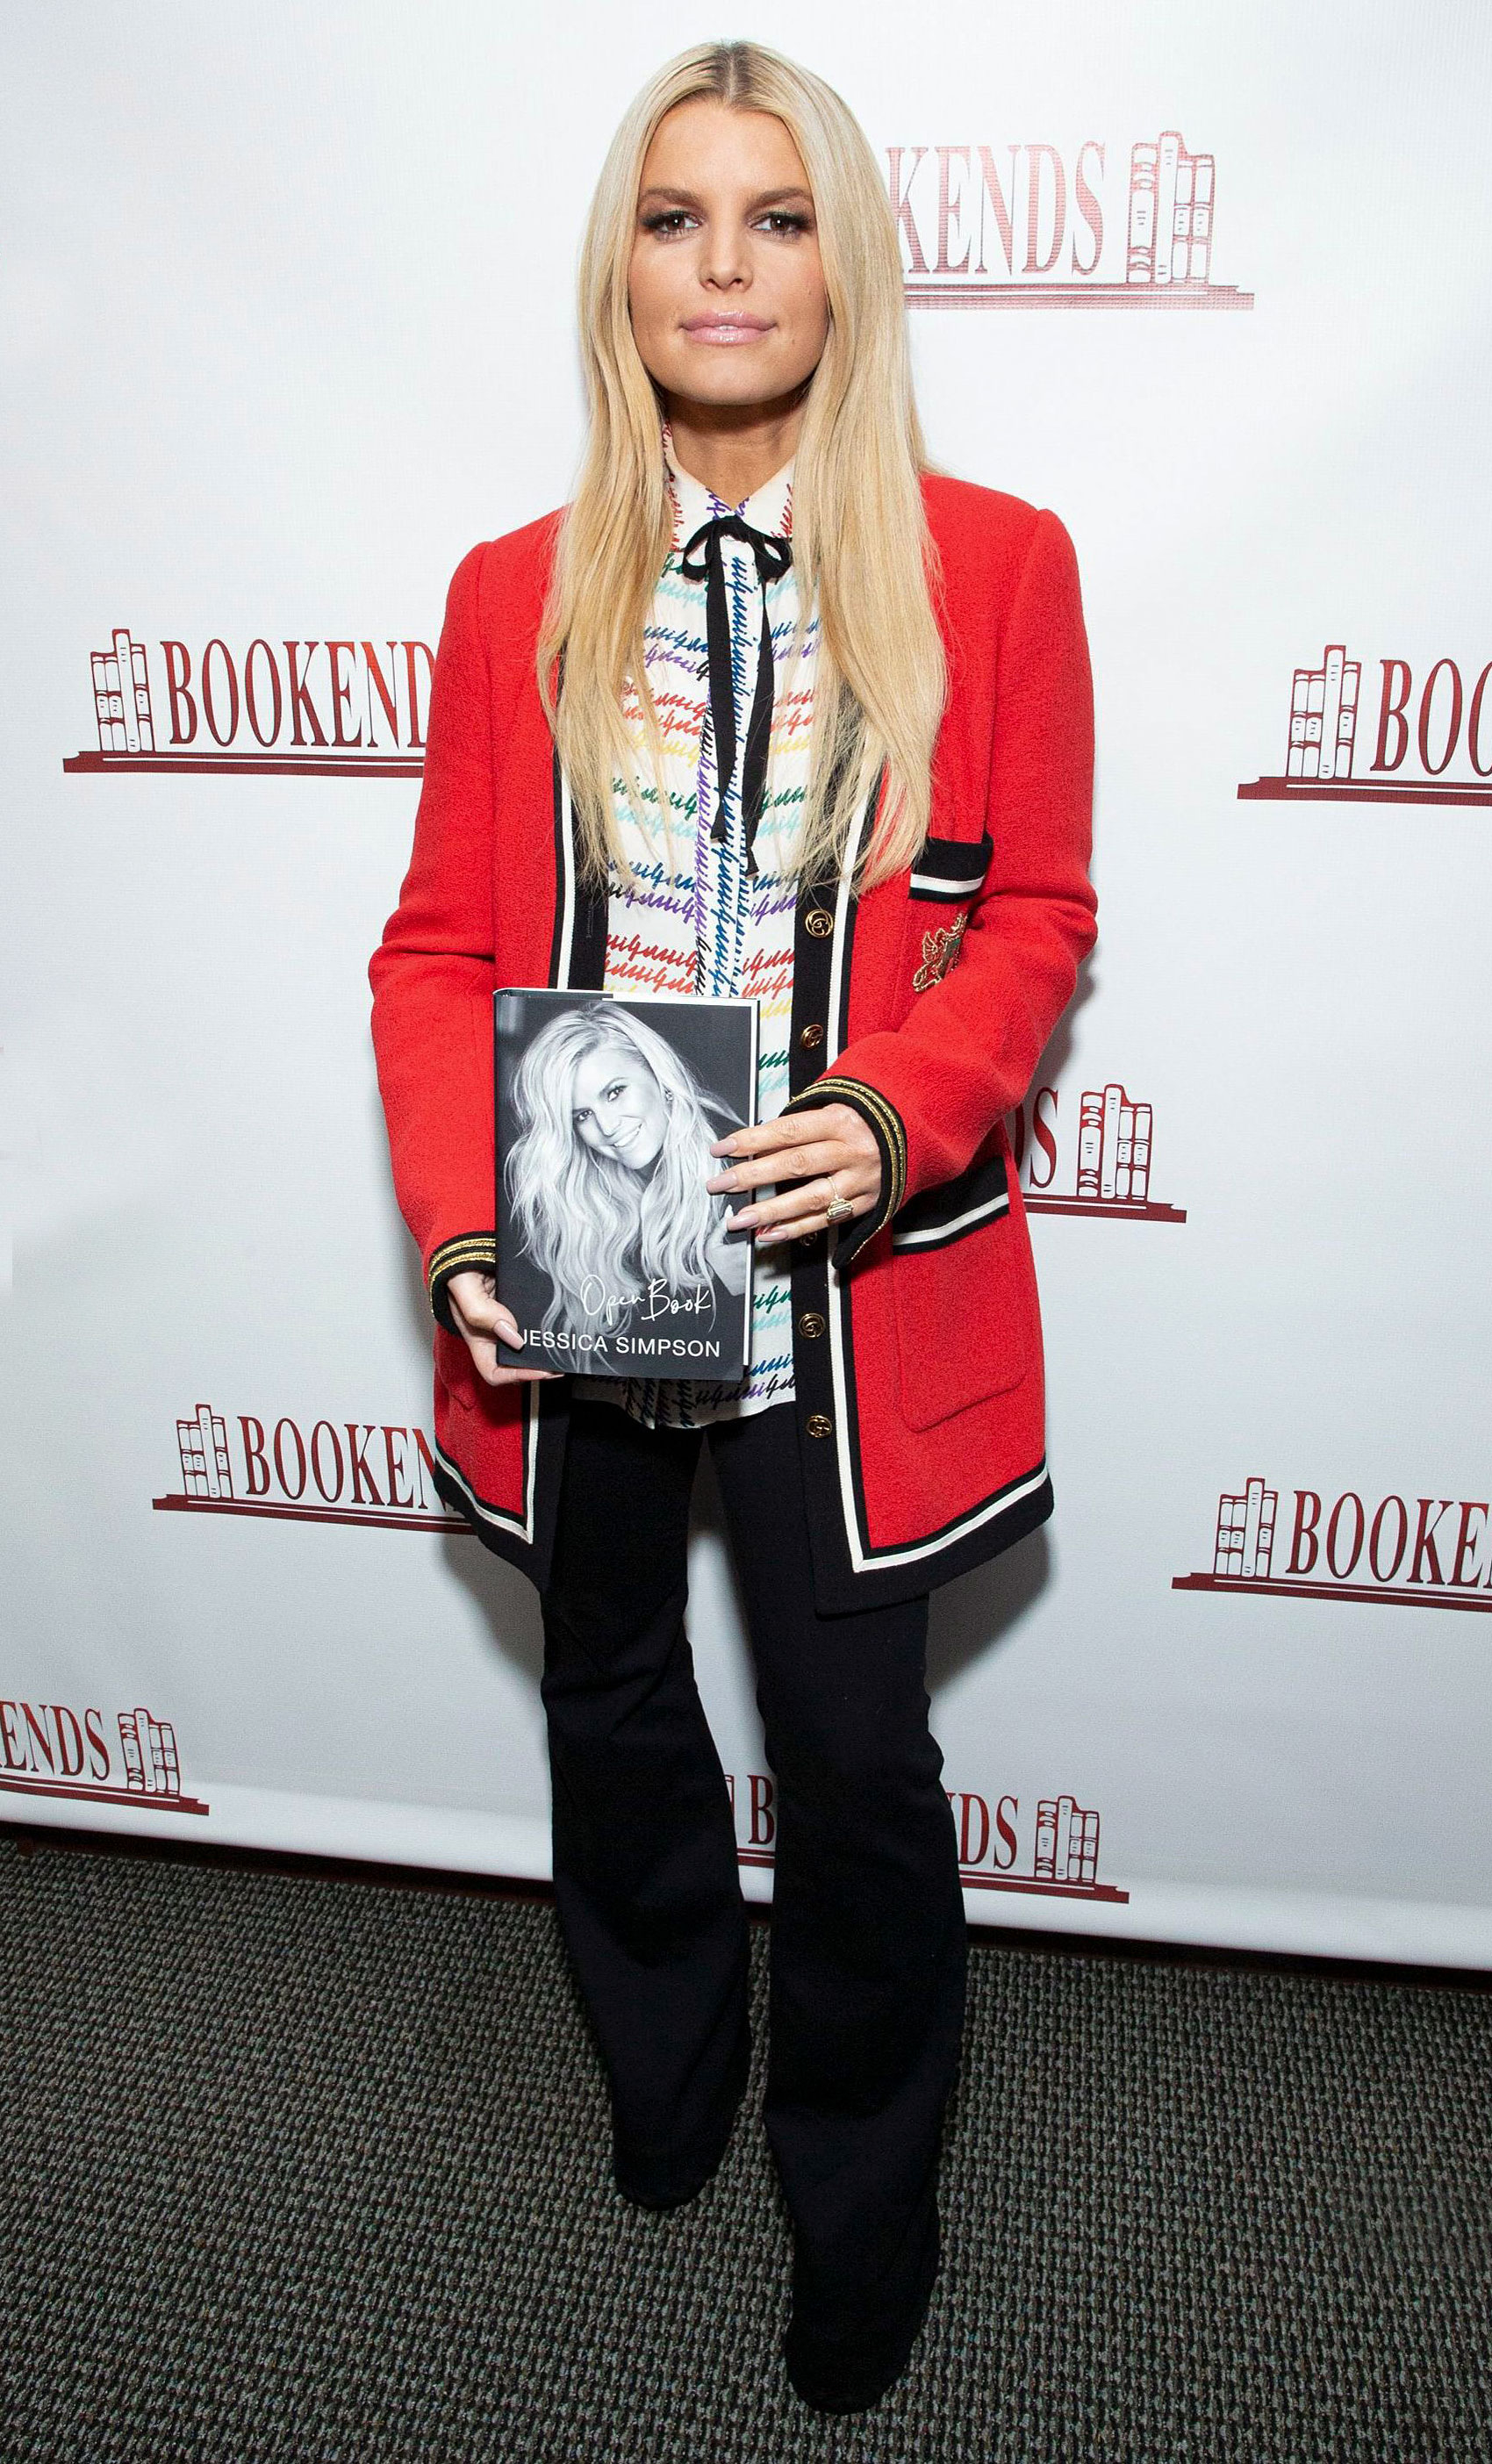 Jessica Simpson 'Open Book' Looks From Book Tour: Pics